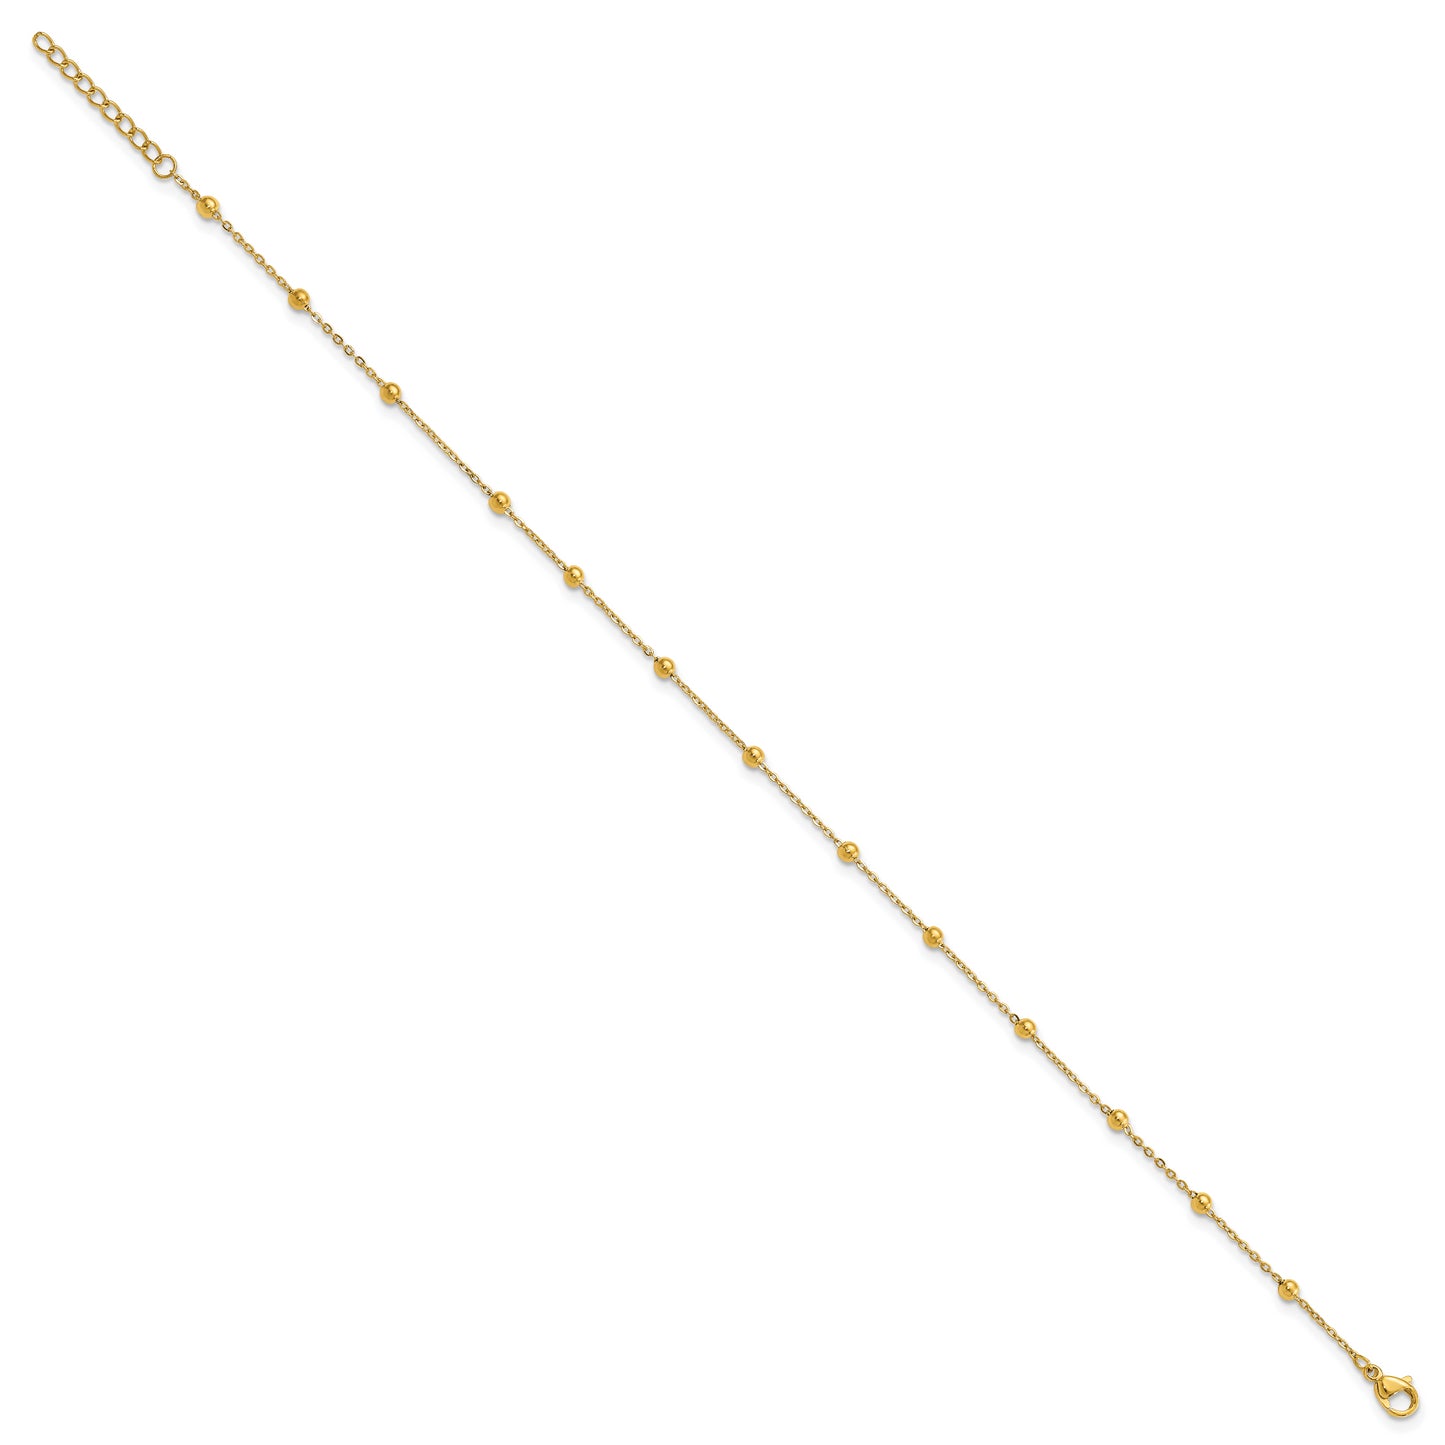 Chisel Stainless Steel Polished Yellow IP-plated Beaded 9.5 inch Anklet Plus 1 inch Extension